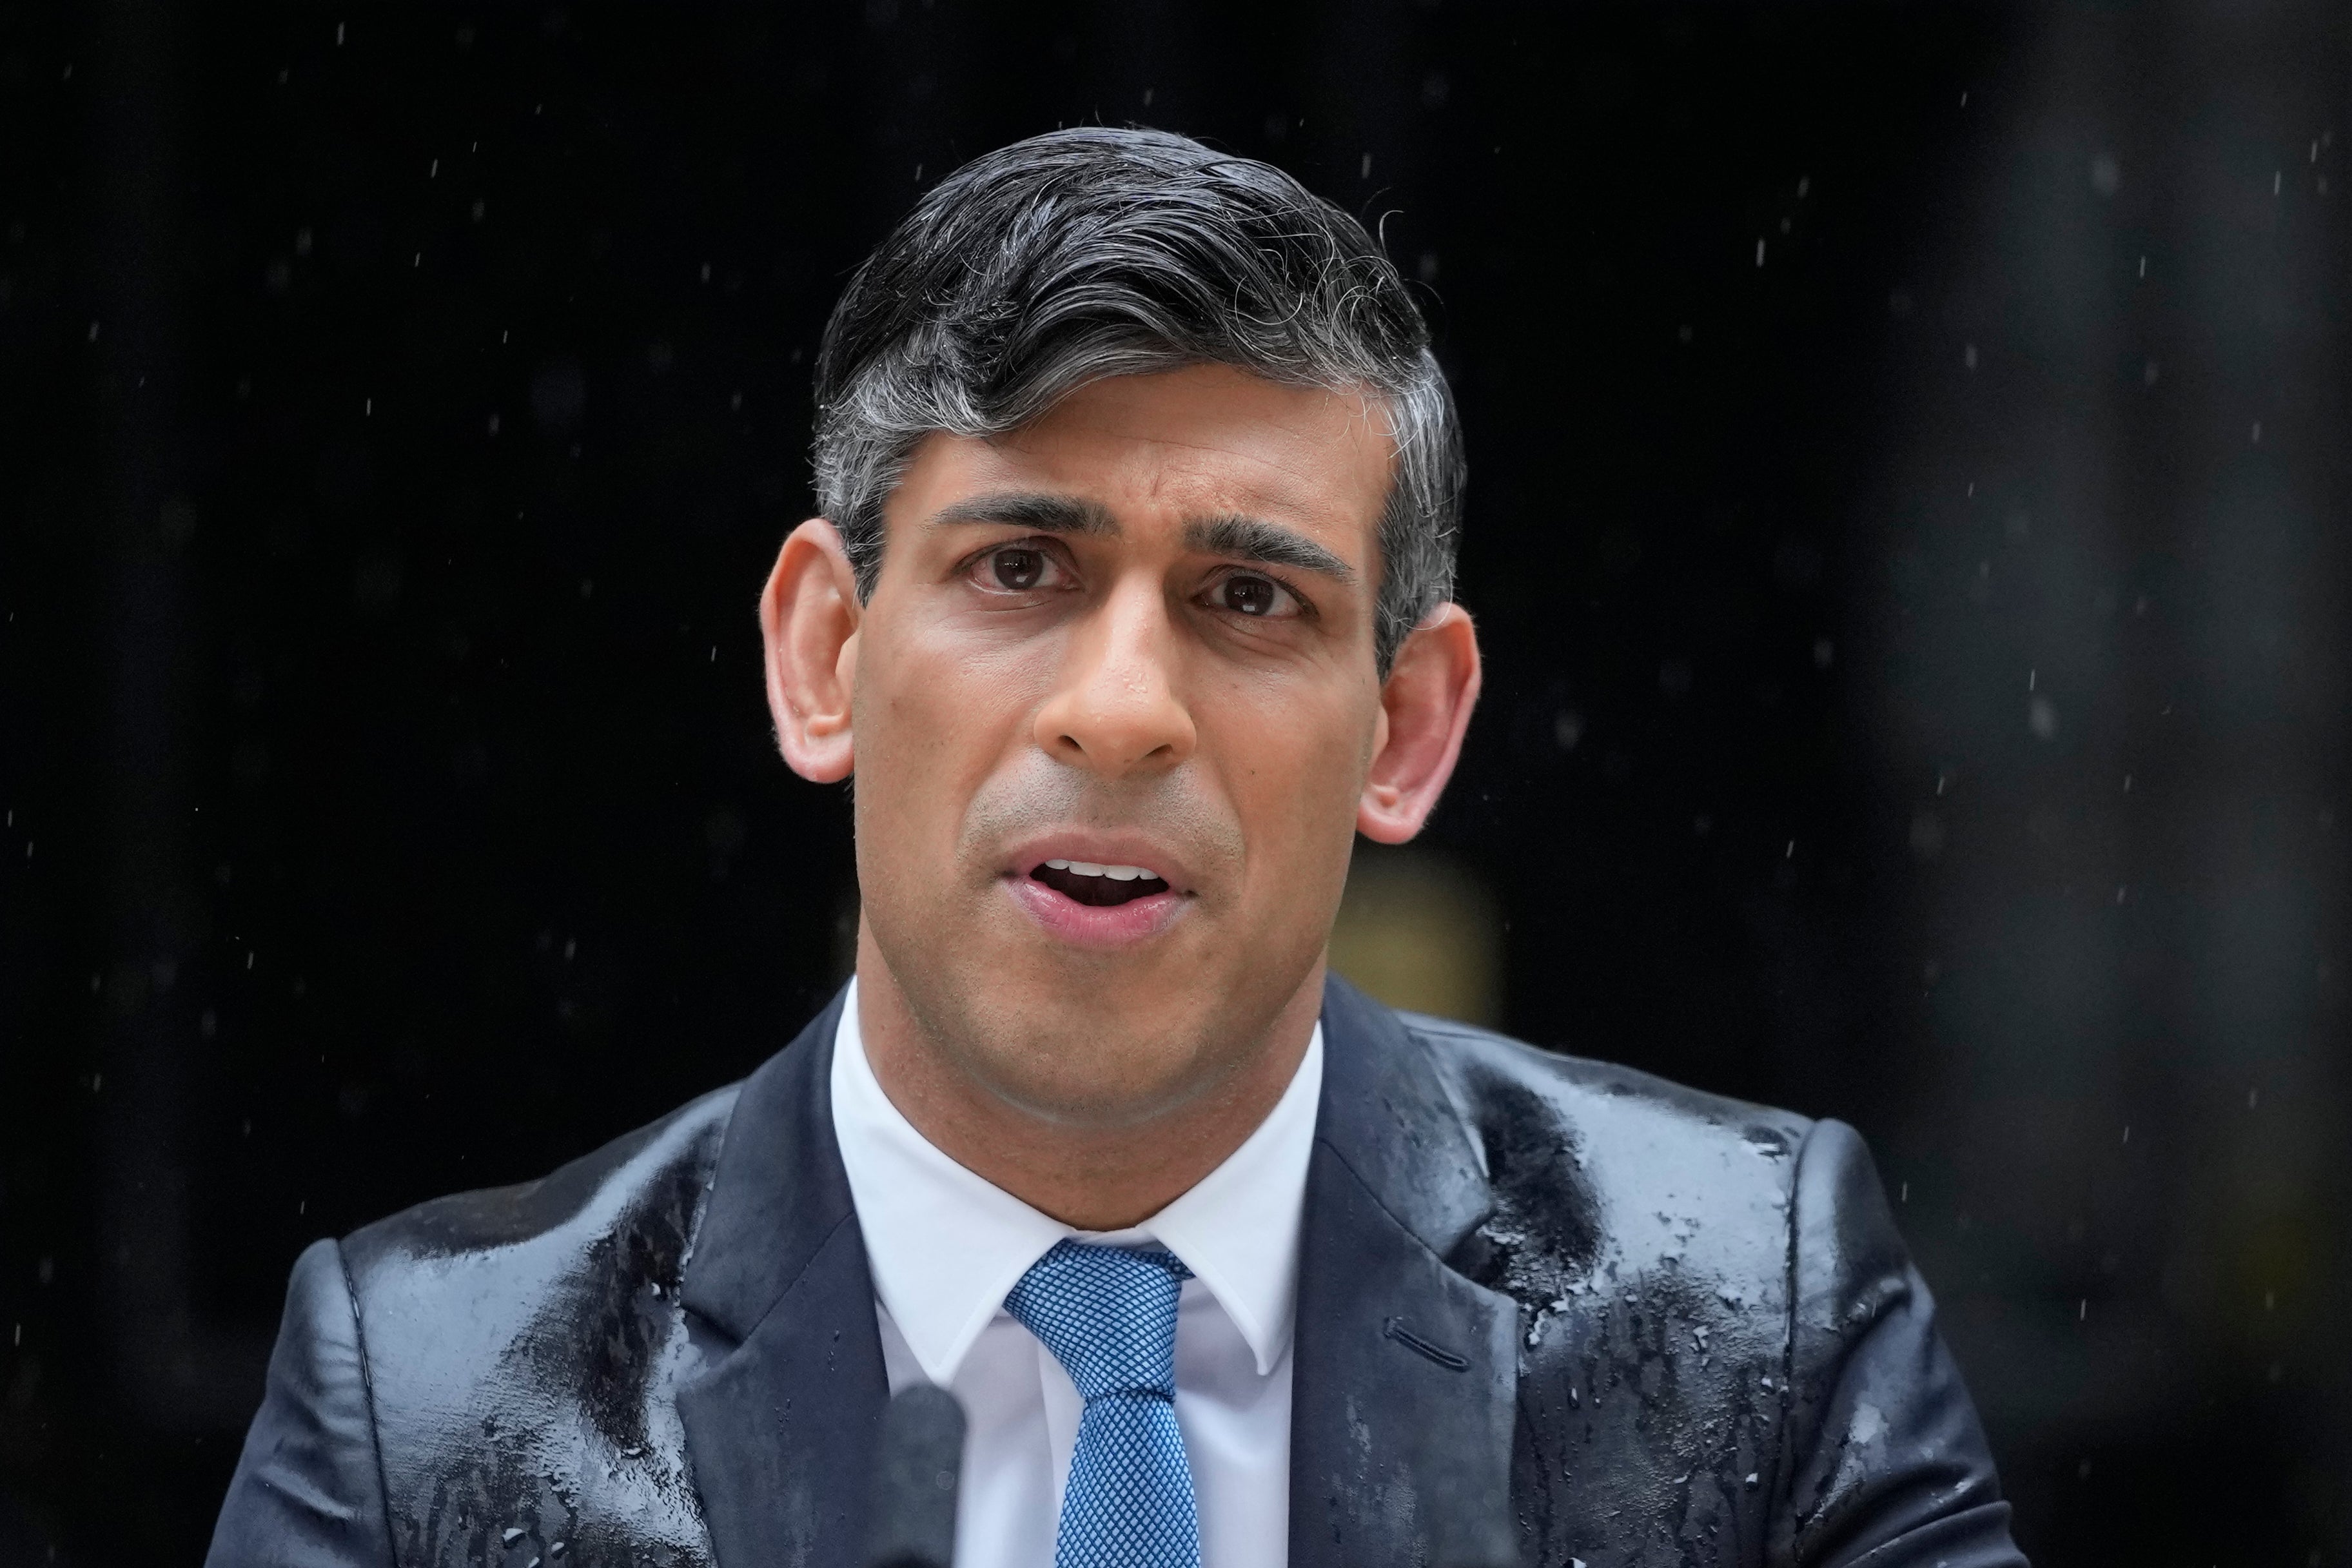 Prime Minister Rishi Sunak announced a snap election for July 4